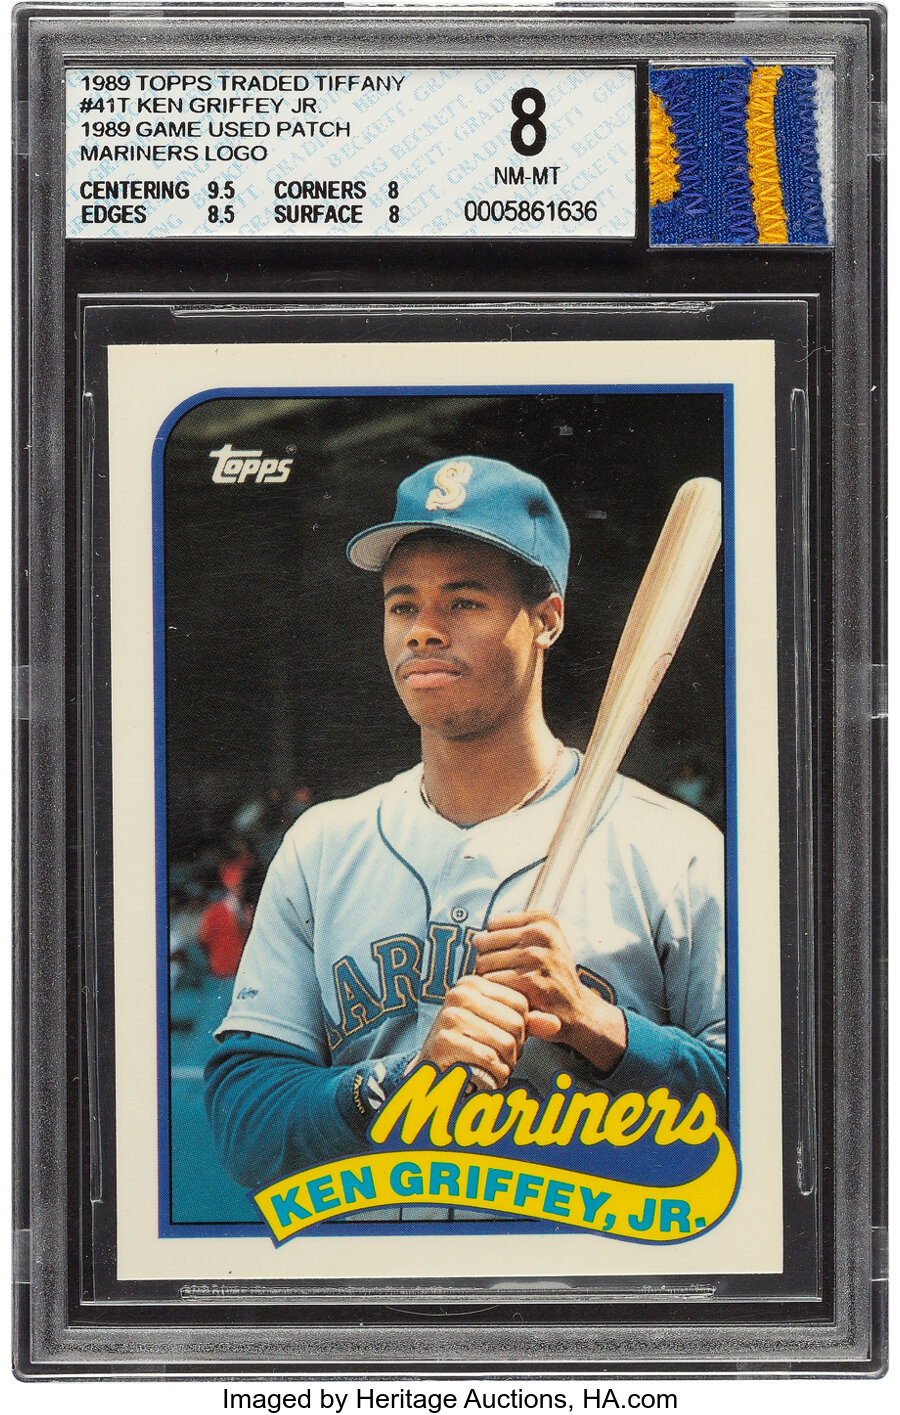 1989 Topps Traded Tiffany Ken Griffey Jr. (with 1989 Game-Used Mariners Jersey Patch) #41T BGS NM-MT 8